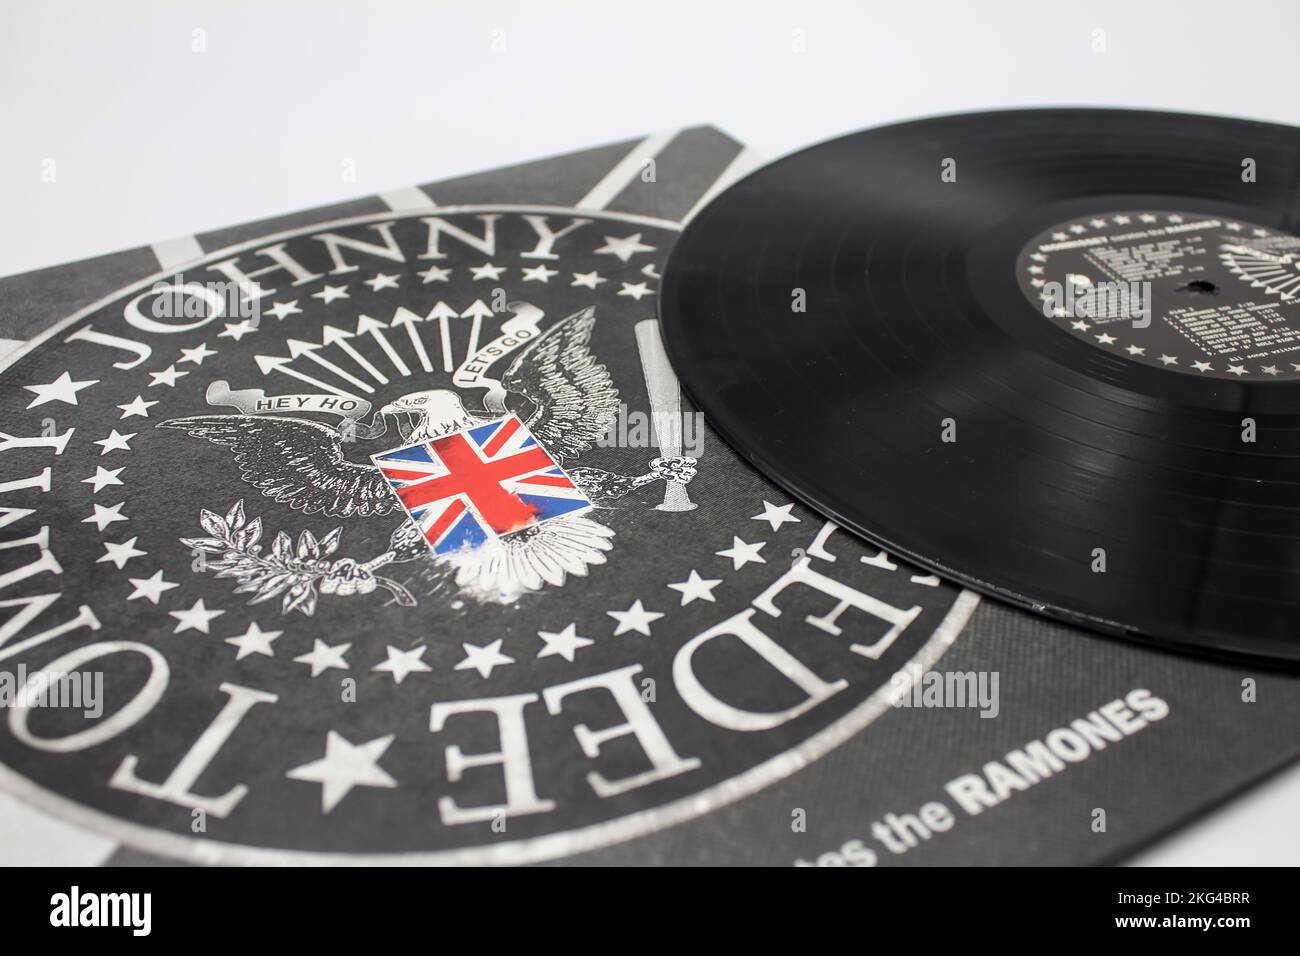 Punk Rock band, The Ramones music album on vinyl record LP disc. Titled:  Morrissey Curates The Ramones Stock Photo